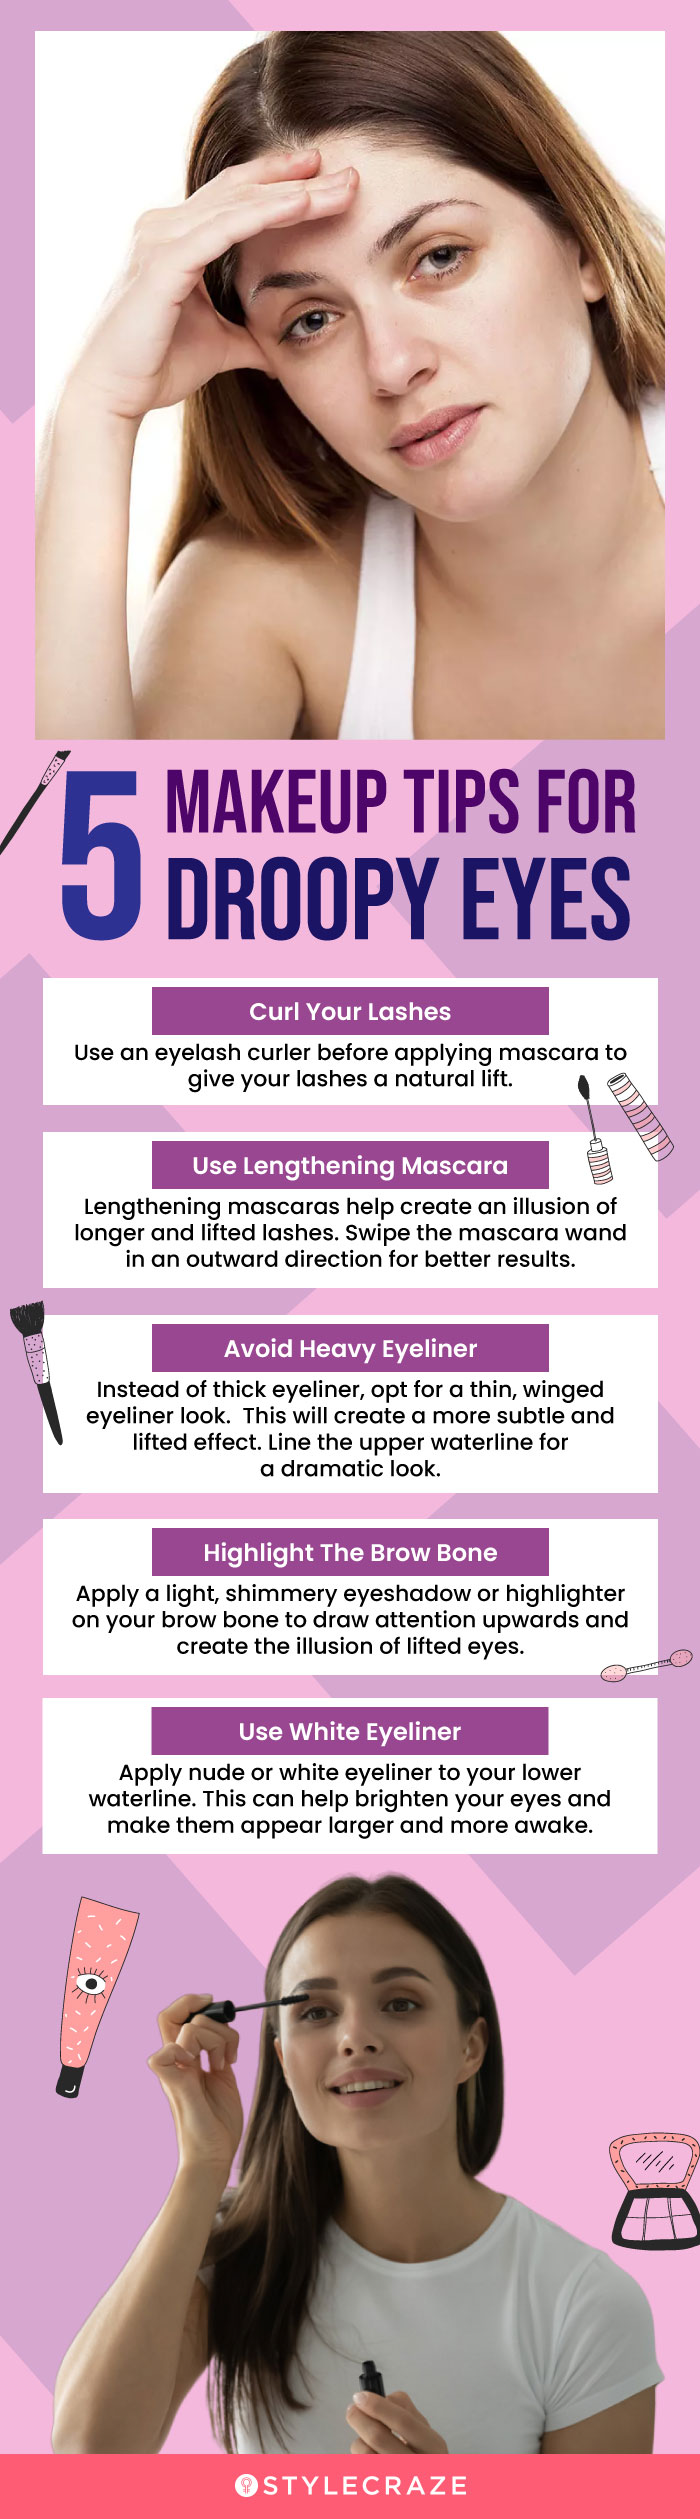 5 makeup tips for droopy eyes (infographic)